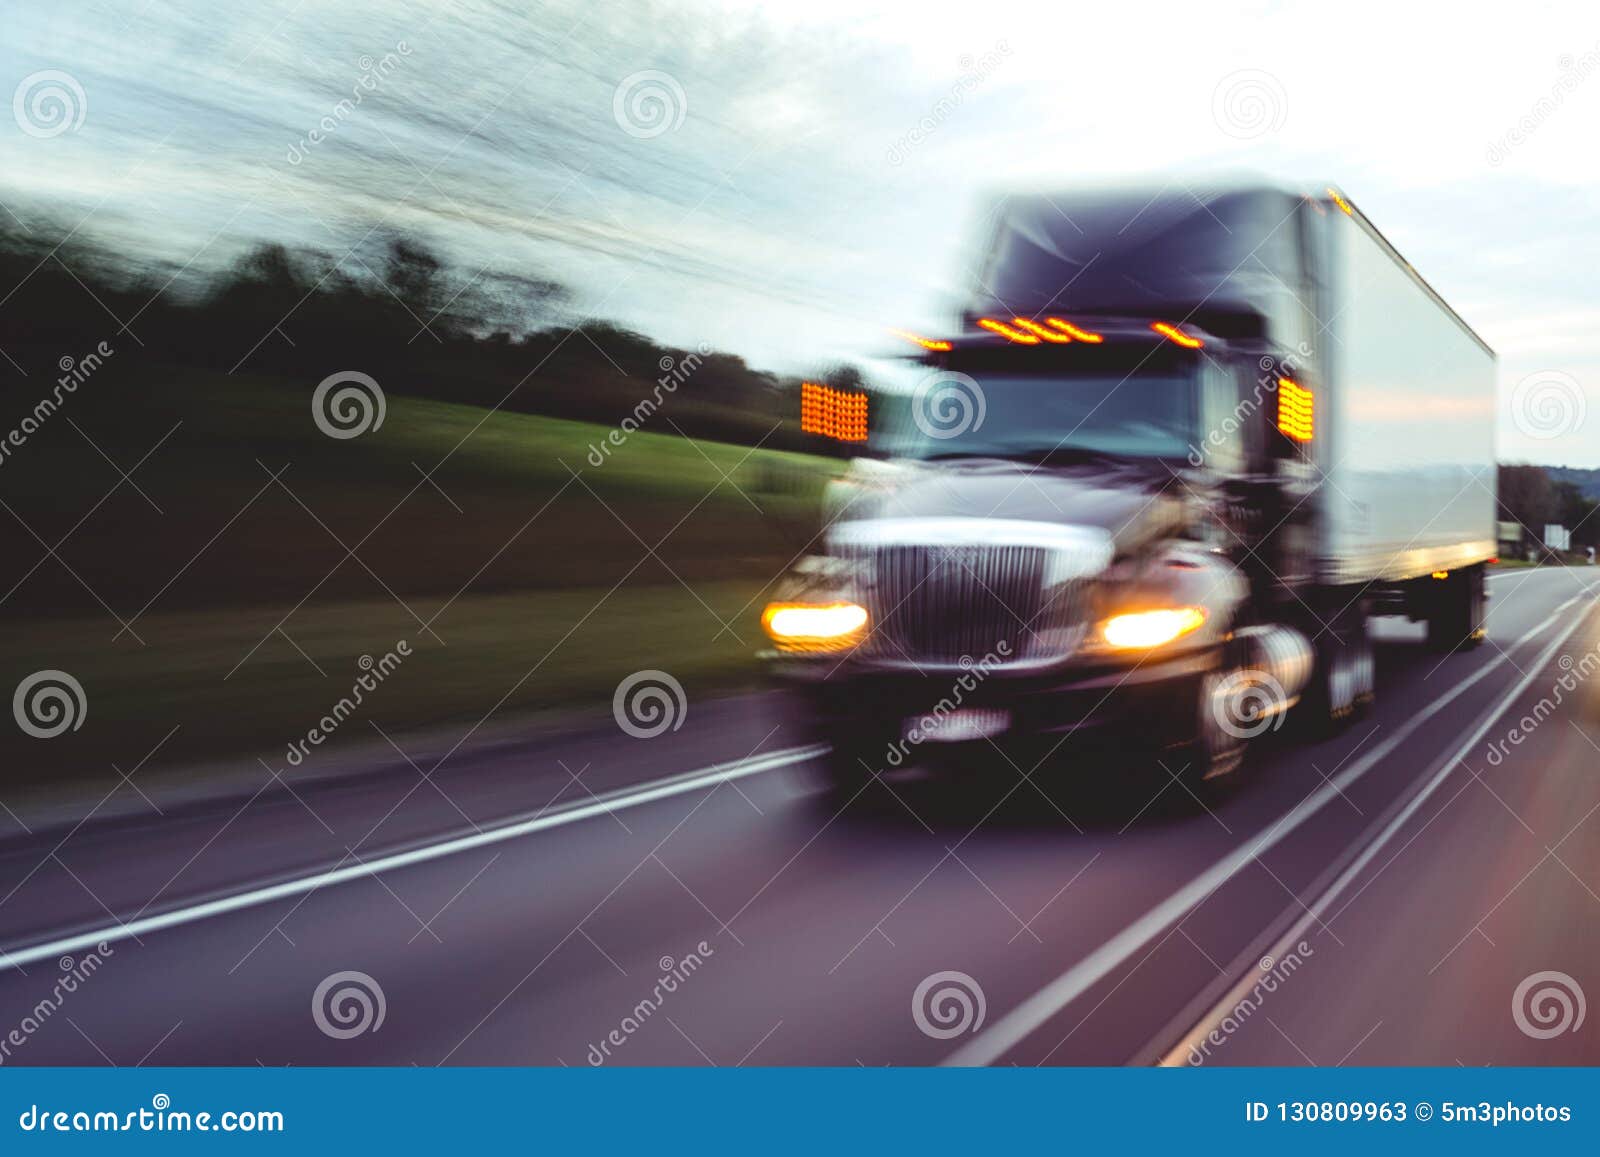 semi truck on highway concept with motion blur